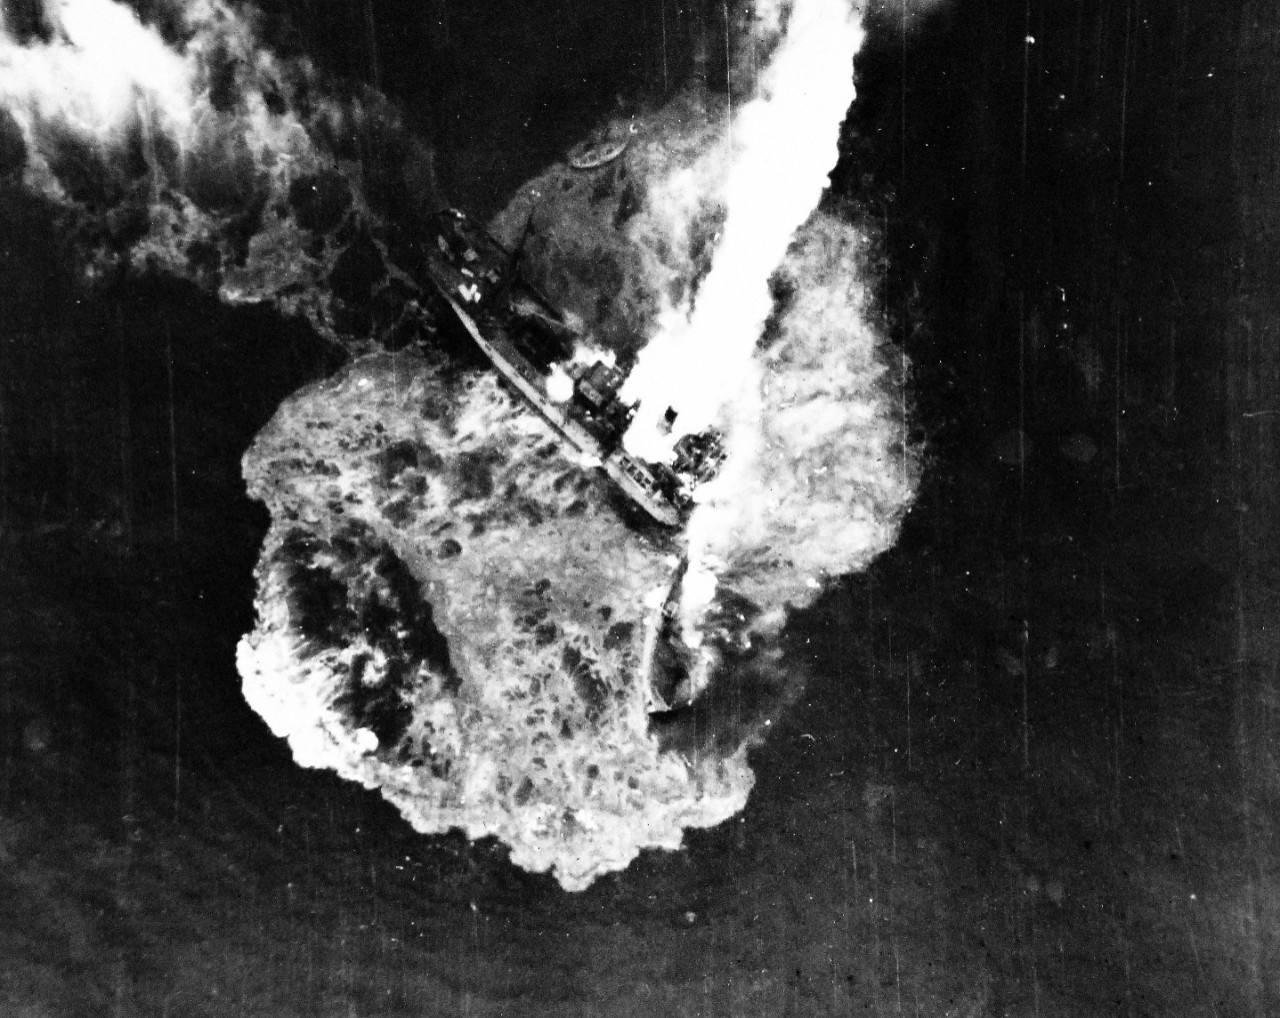 80-G-490116:  Raids on Japanese Home Islands, July 1945.   Japanese freighter snaps in two following a direct bomb hit from carrier-based aircraft of the Third Fleet.  The ship was bombed and destroyed near Tsugaru-Kaikyo, east of Hokkaido, Japan. An empty life boat can be seen at top, center, as the bow breaks away following an internal explosion, July 24, 1945.  U.S. Navy Photograph, now in the collections of the National Archives. (2015/12/08).